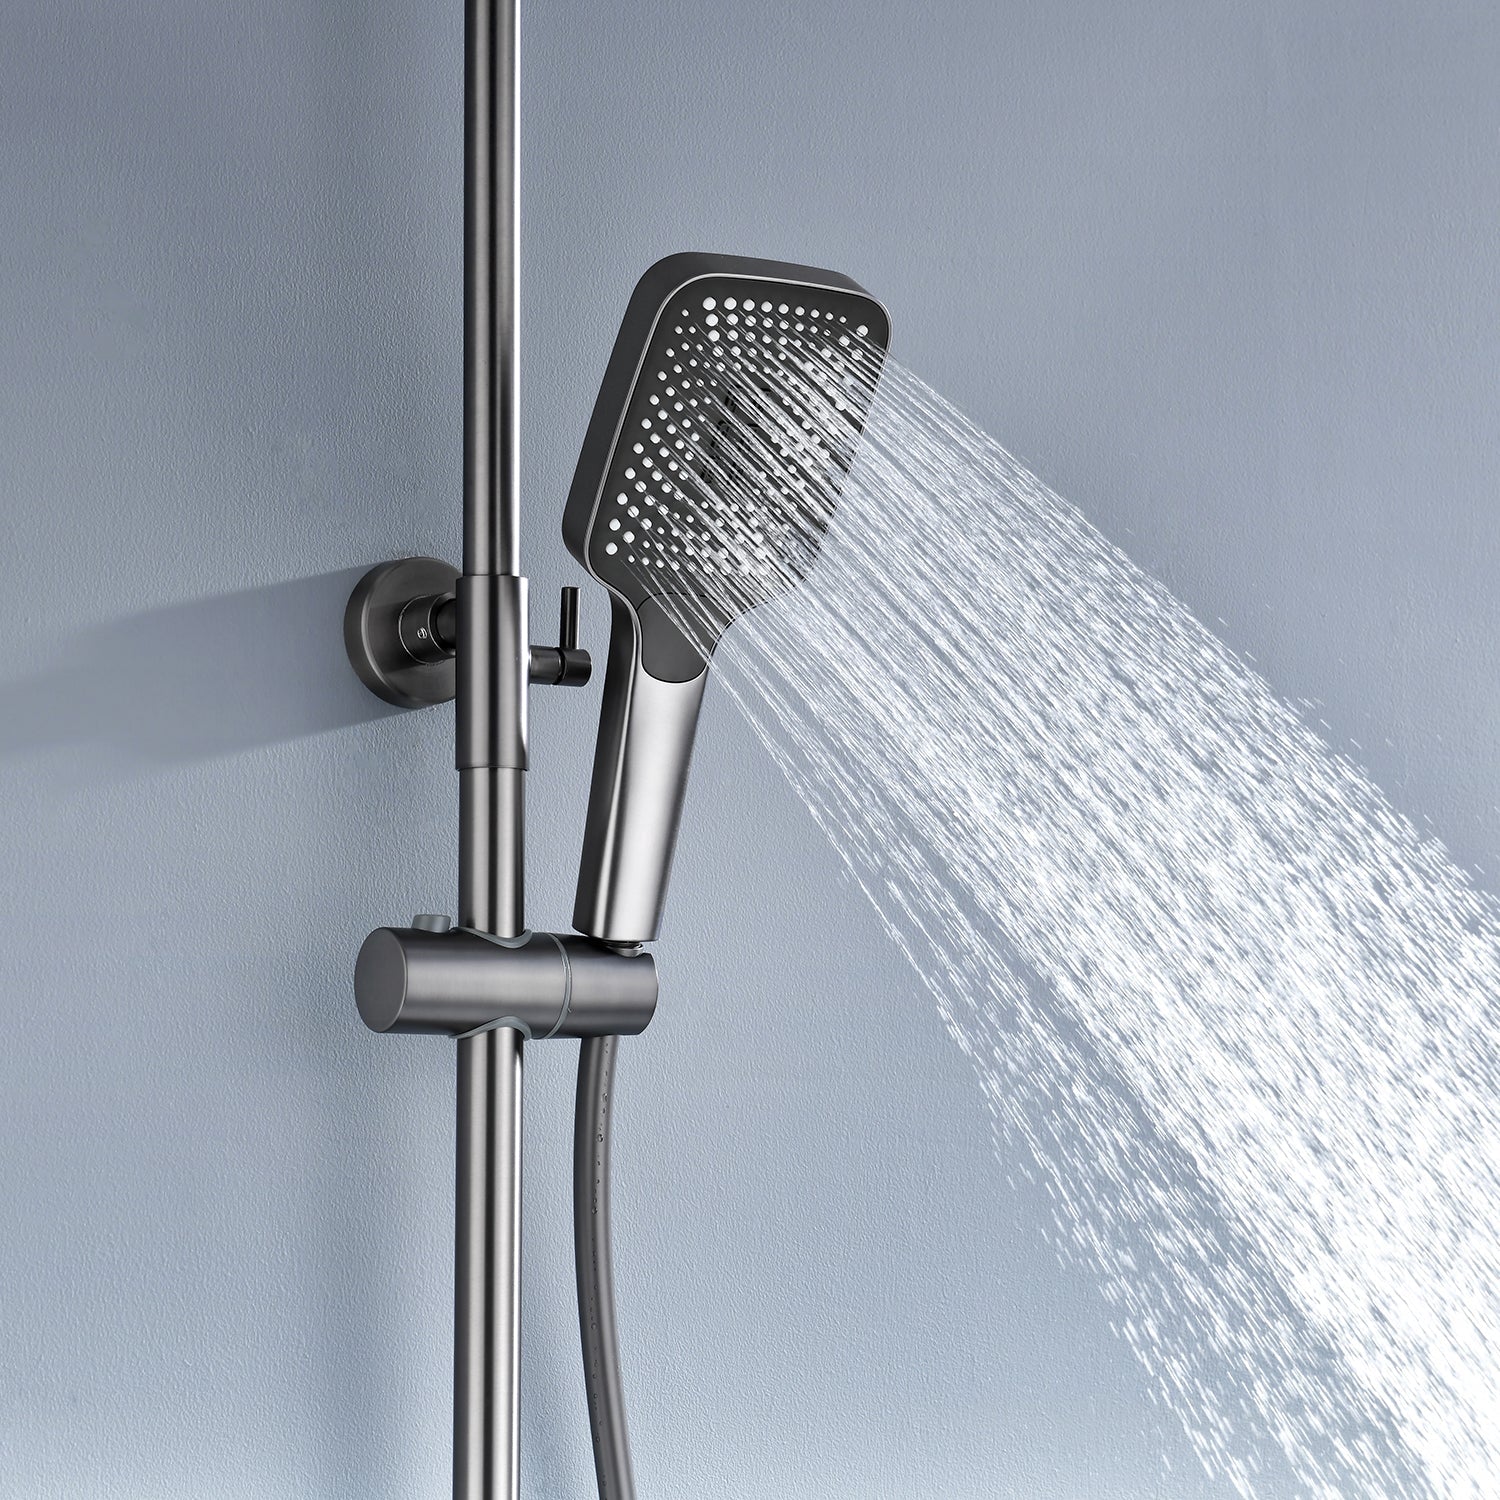 Lefton Thermostatic Shower System With 4 Independent Buttons And 4 Water Outlet Modes SS2203 -Shower Systems- Lefton Home